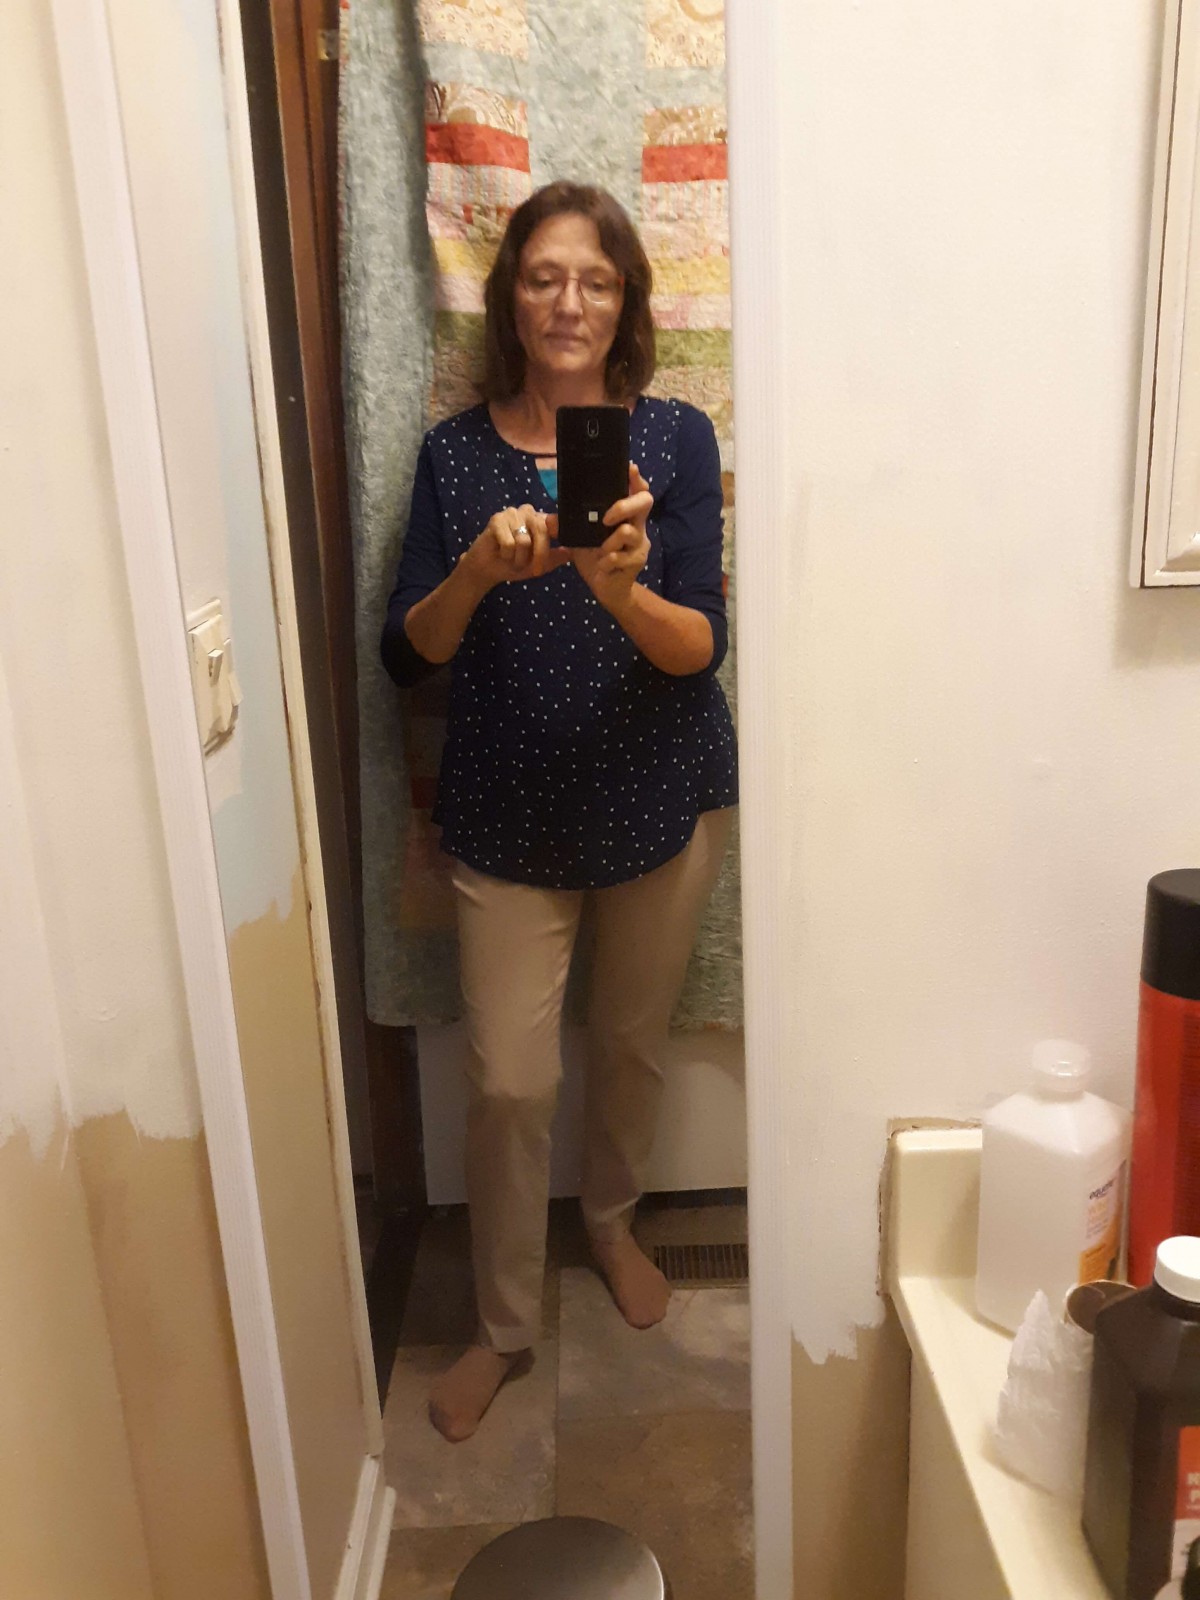 I know, bathroom photos are the worst! And I'm about to remodel it. But it's the only full length mirror I have.